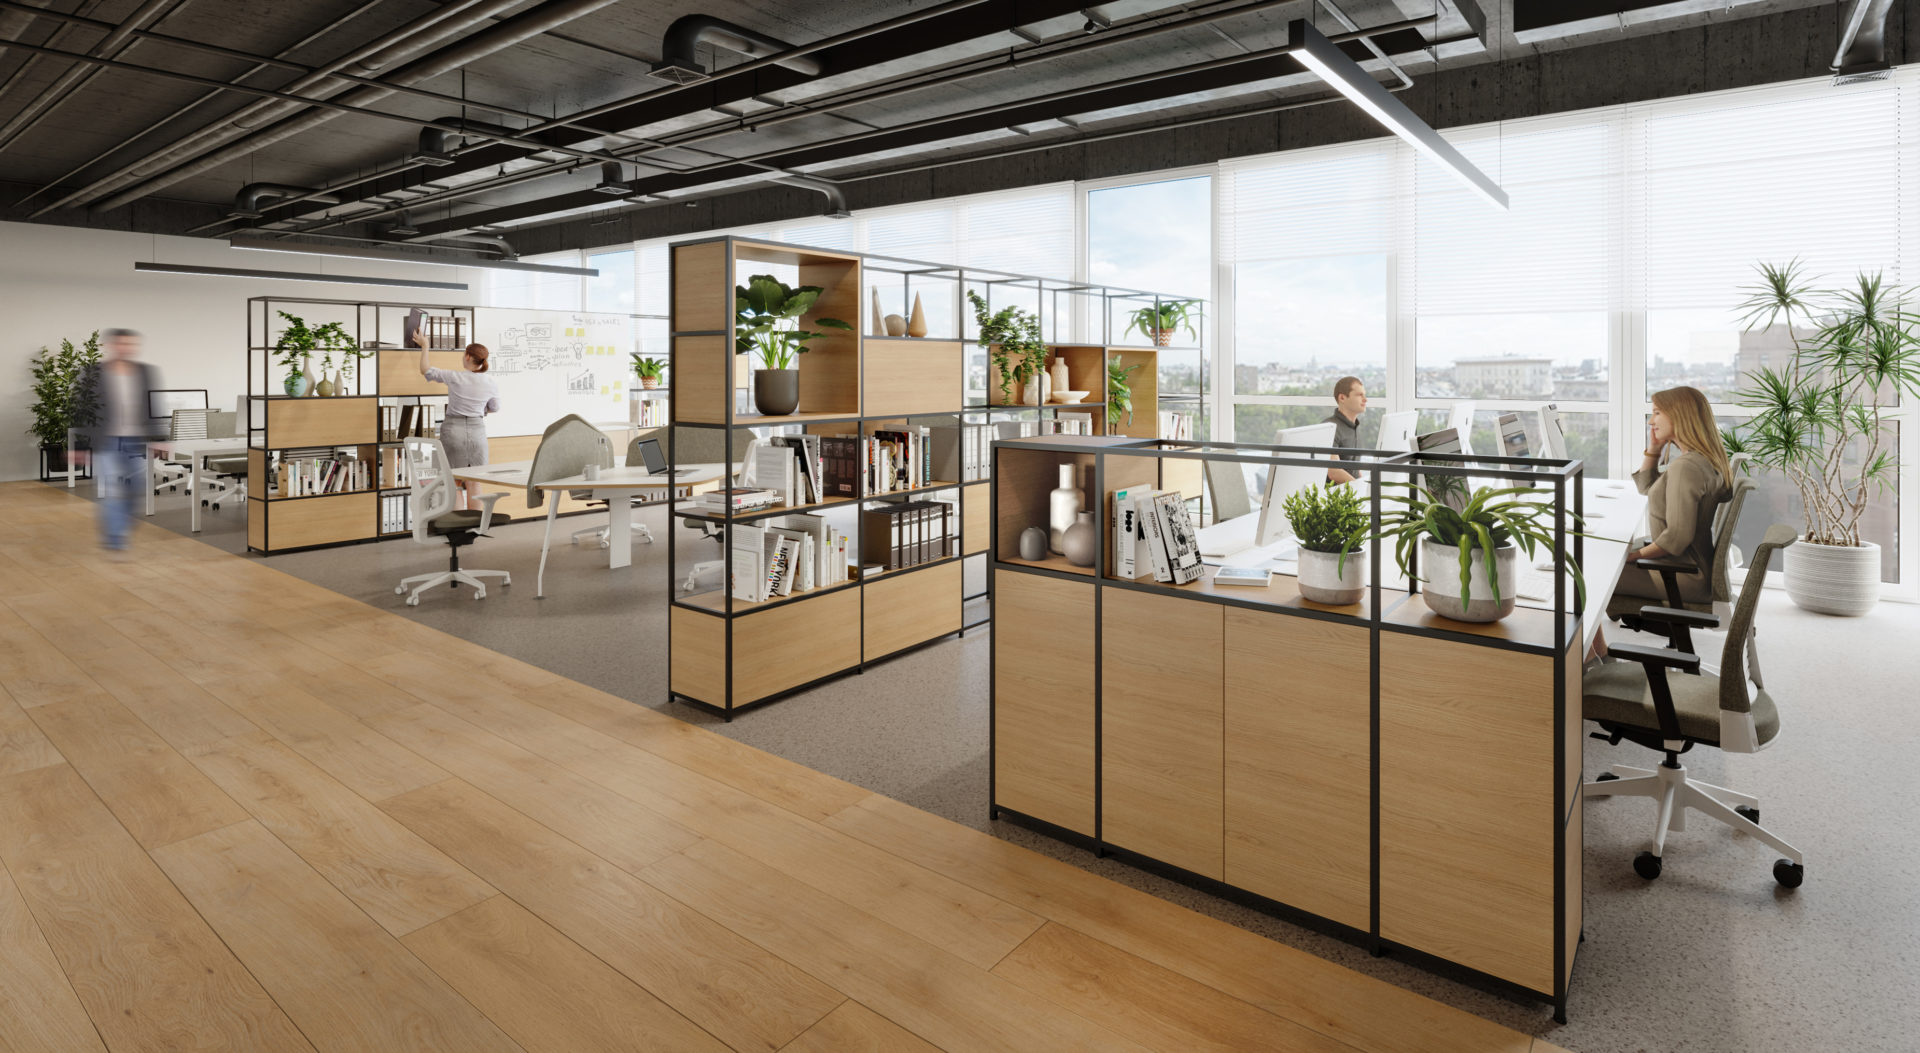 Space design and office furniture, keys to attracting talent